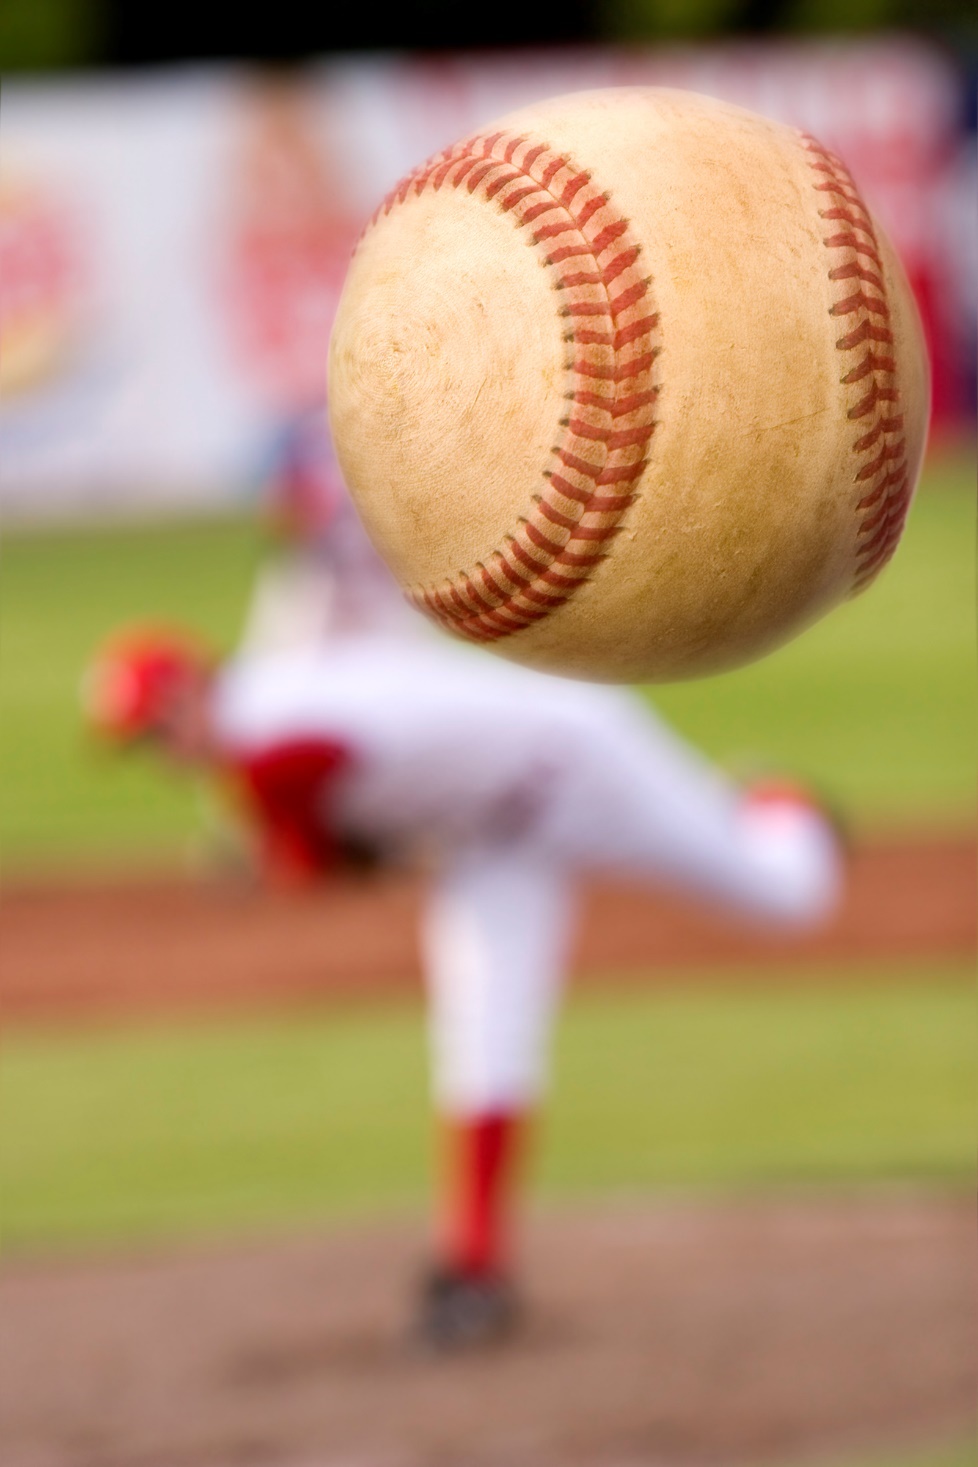 A baseball player throwing a ball

Description automatically generated with medium confidence